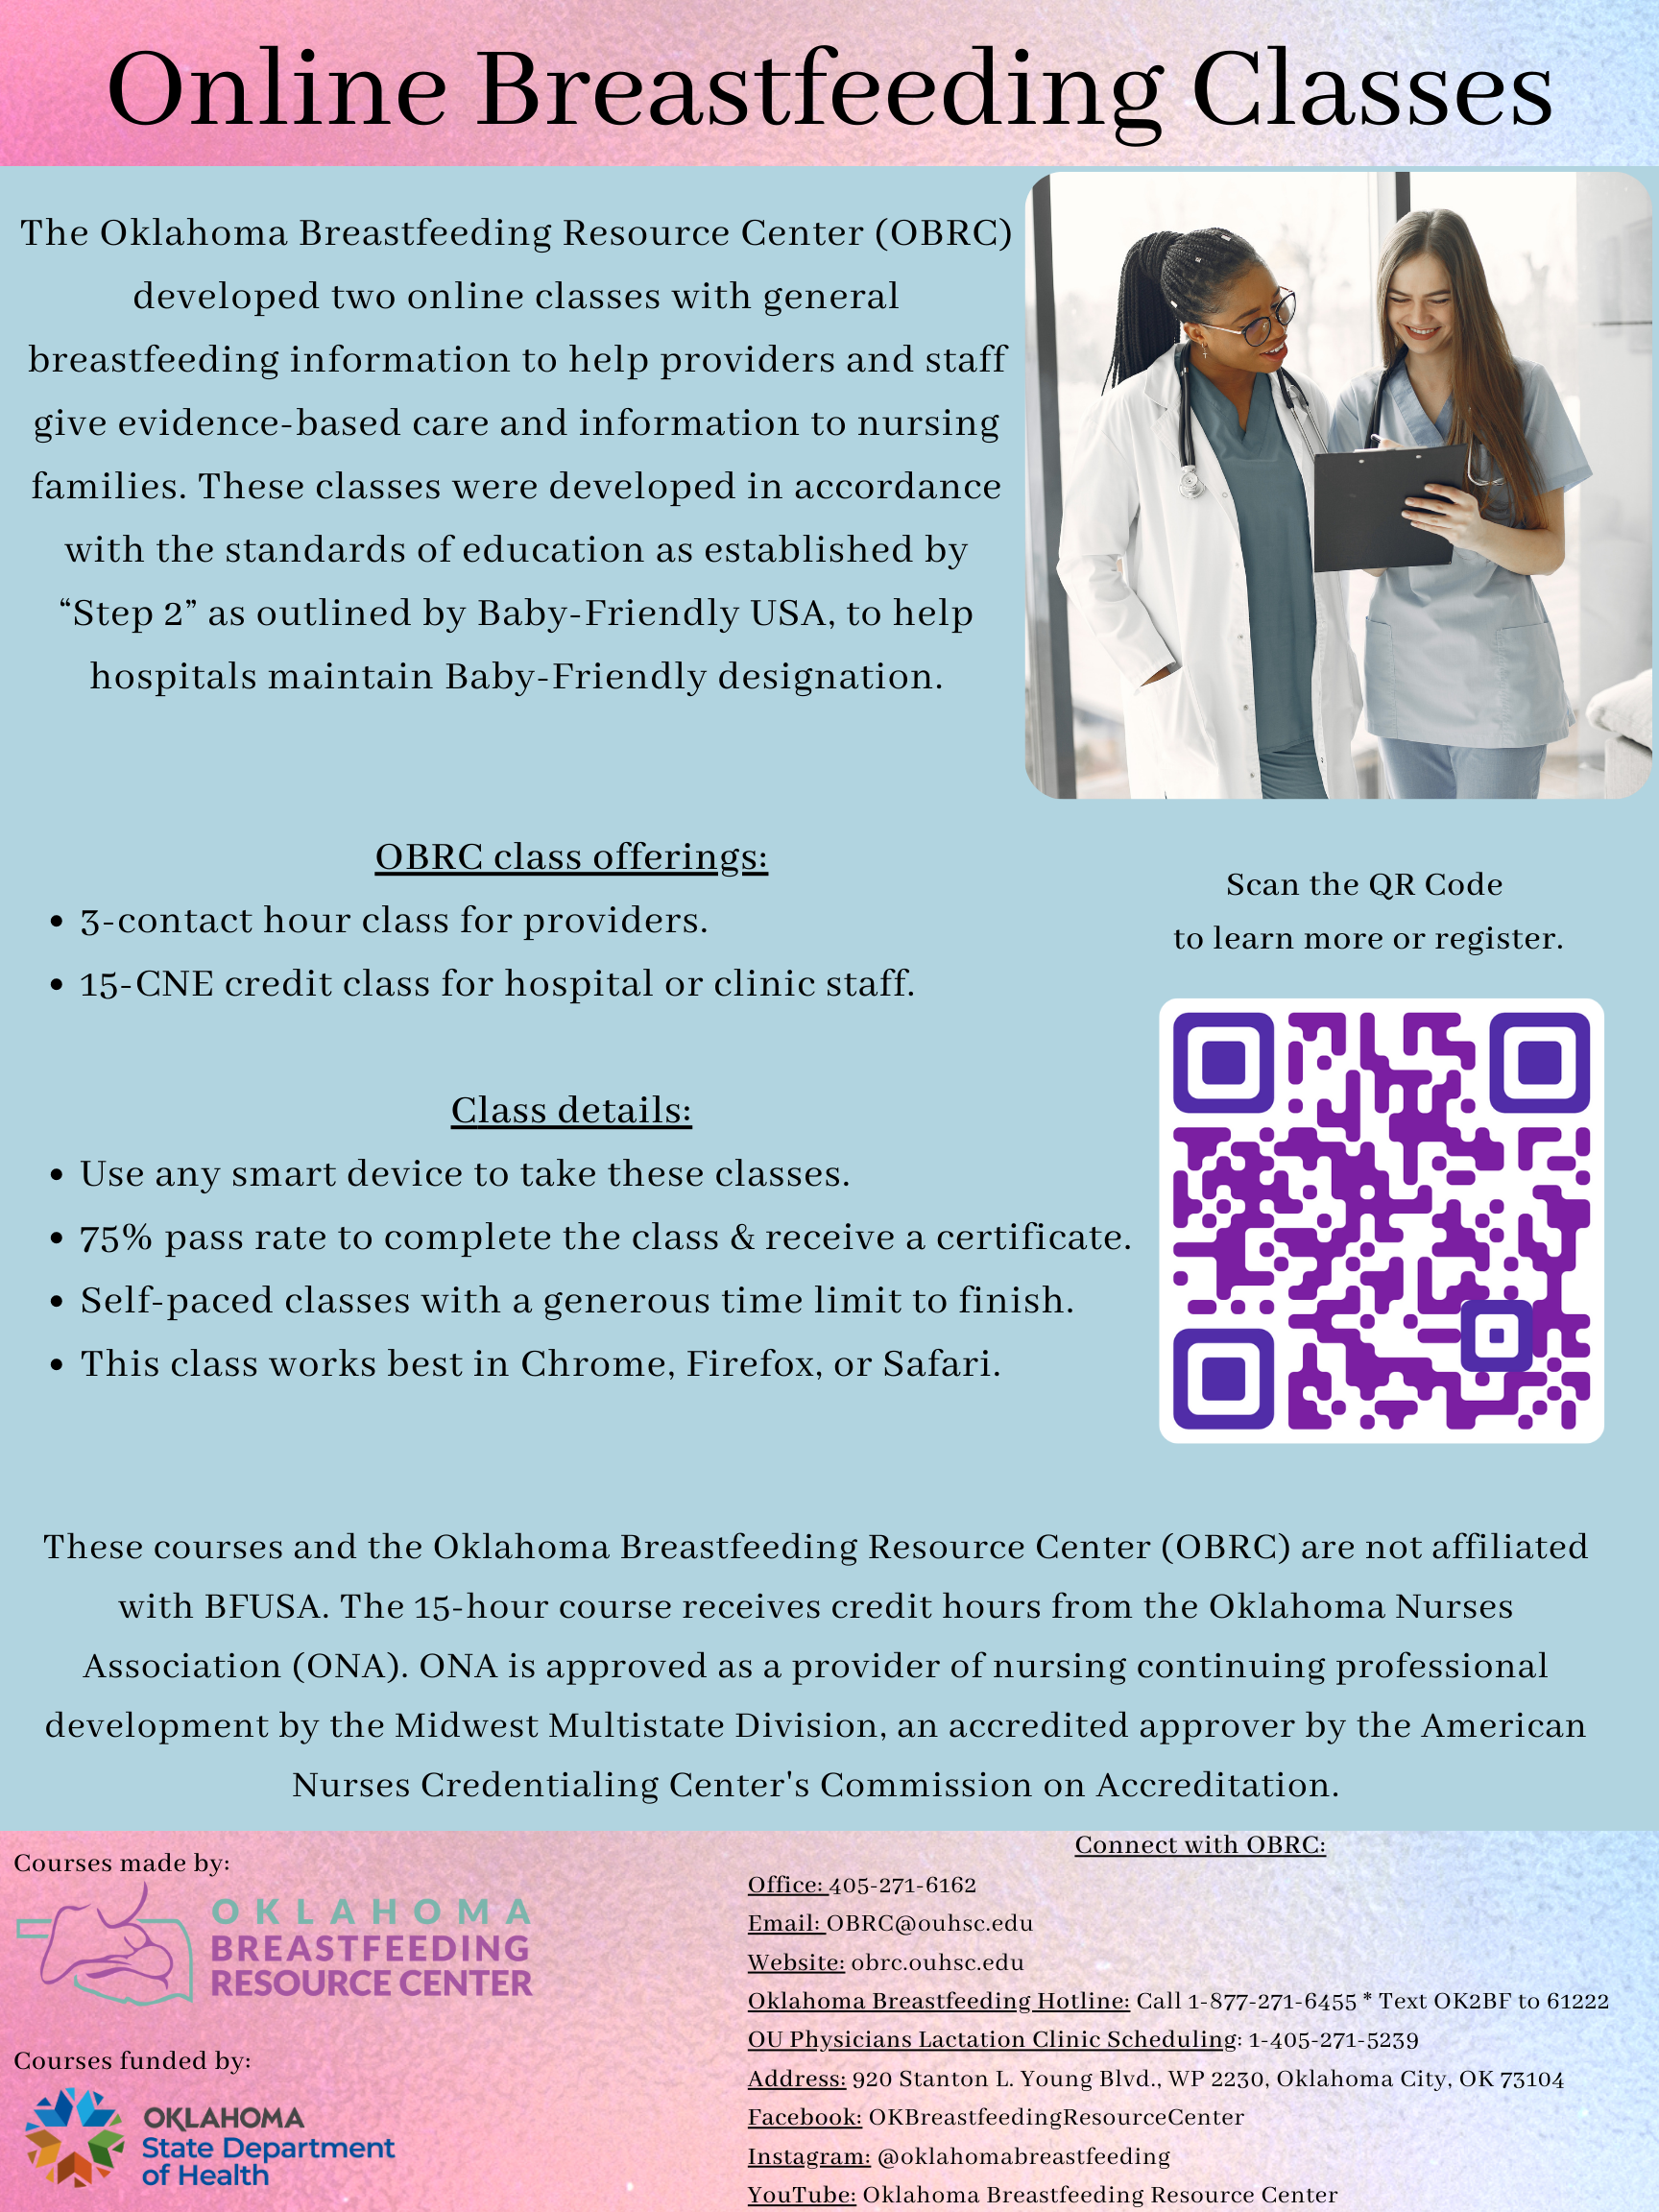 Flyer of OBRC's online breastfeeding education for healthcare professionals